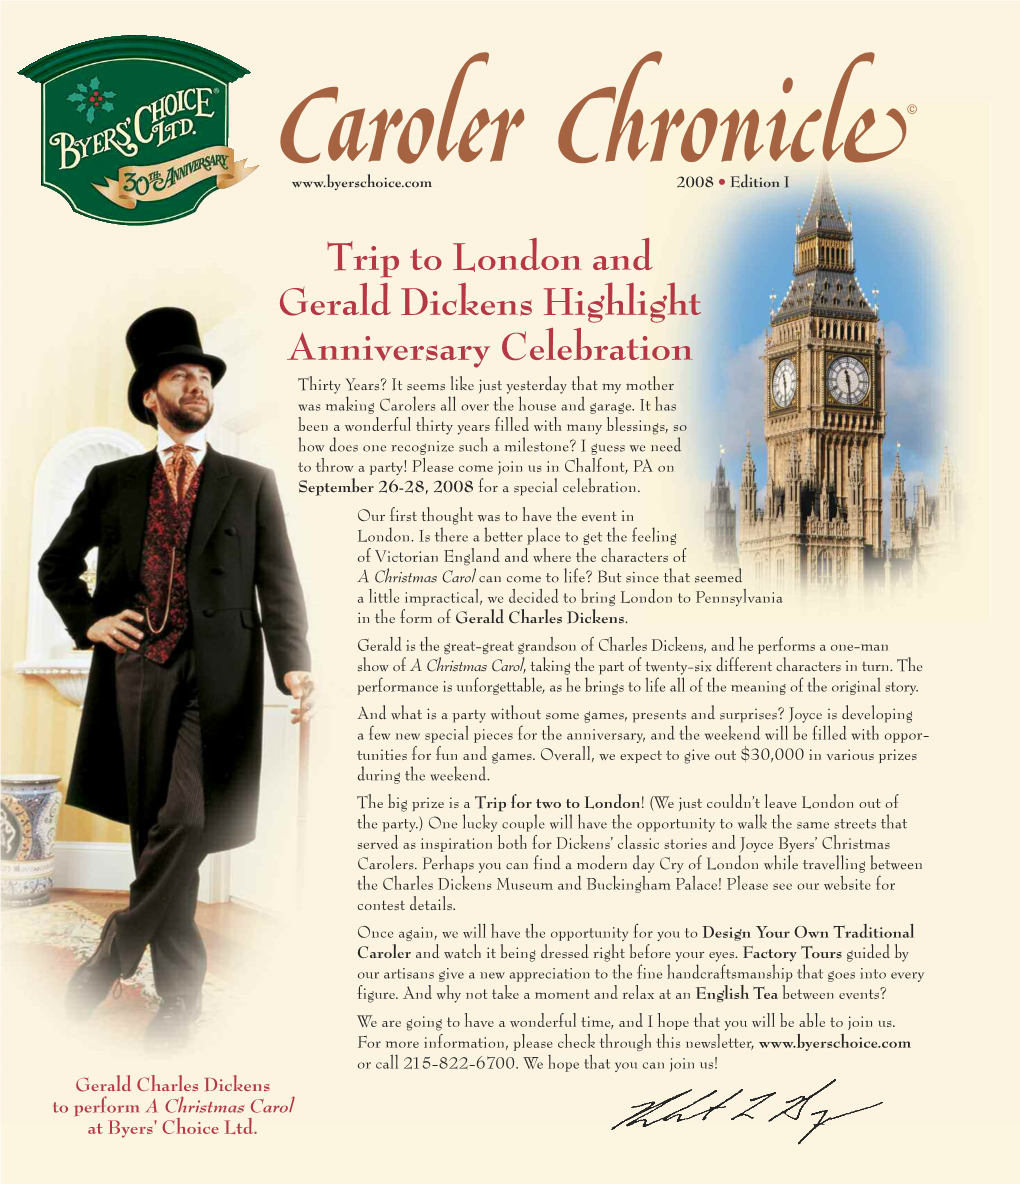 Trip to London and Gerald Dickens Highlight Anniversary Celebration